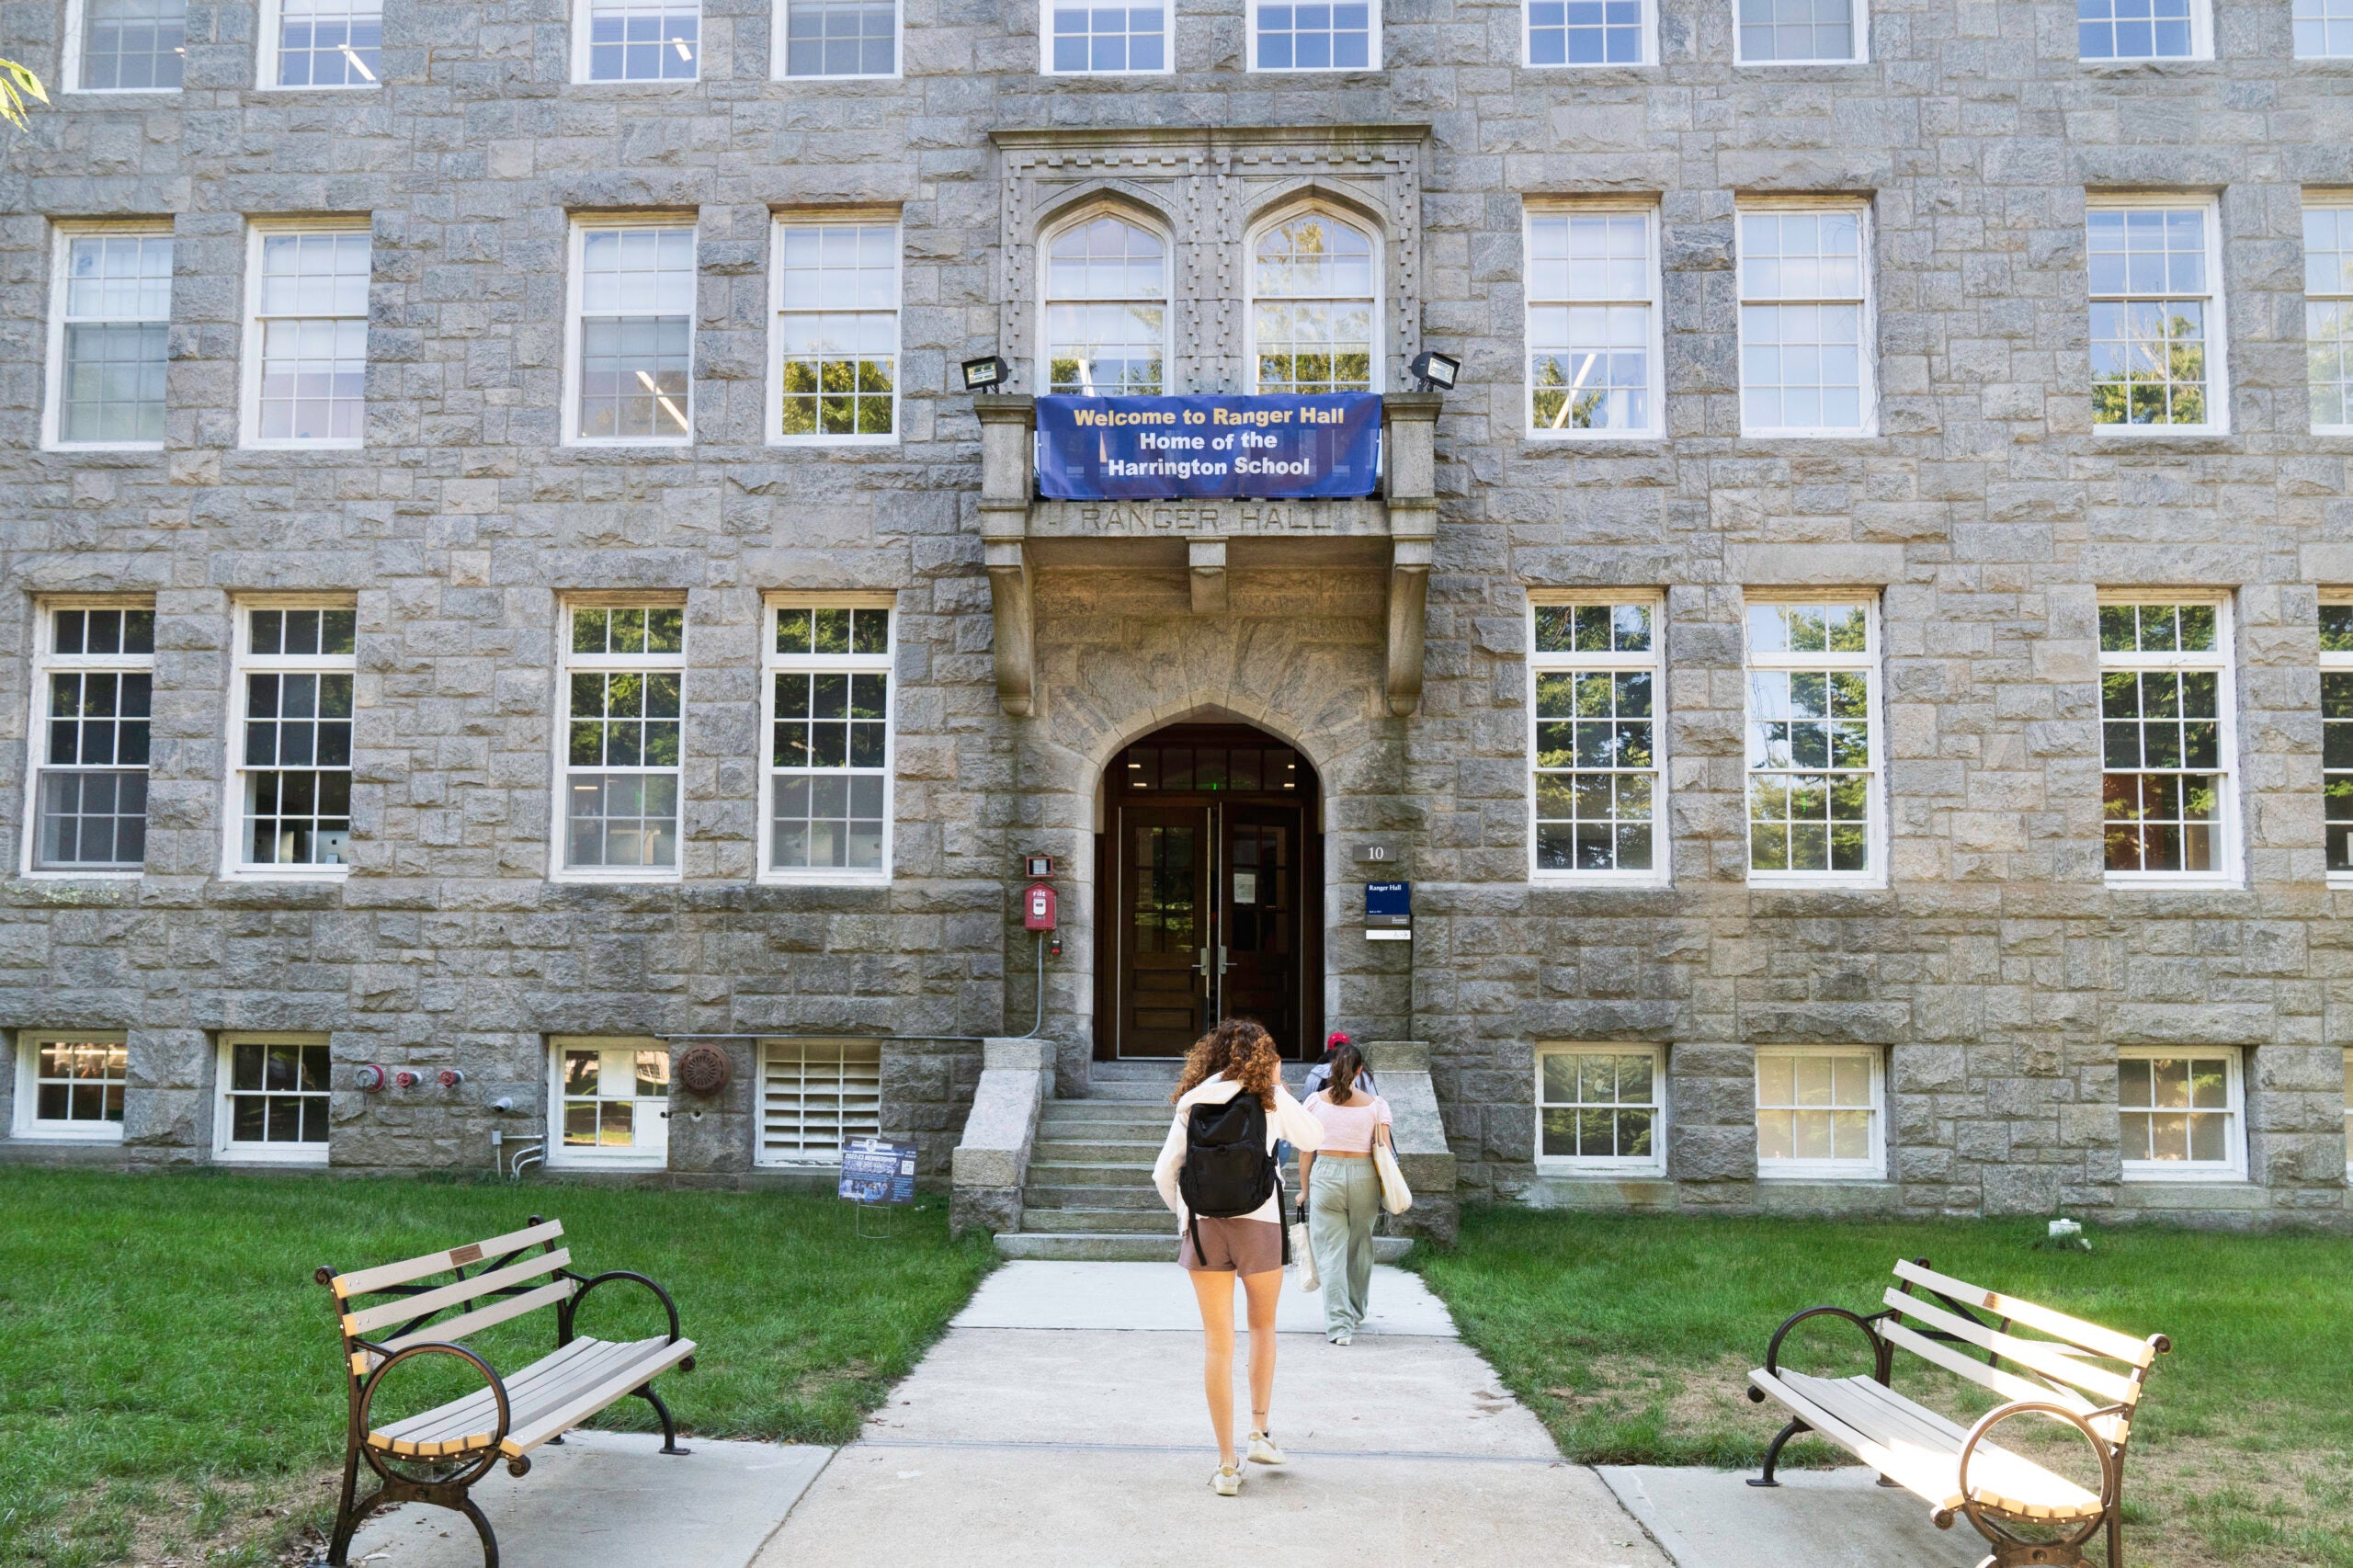 Exterior of Ranger Hall with students entering the building